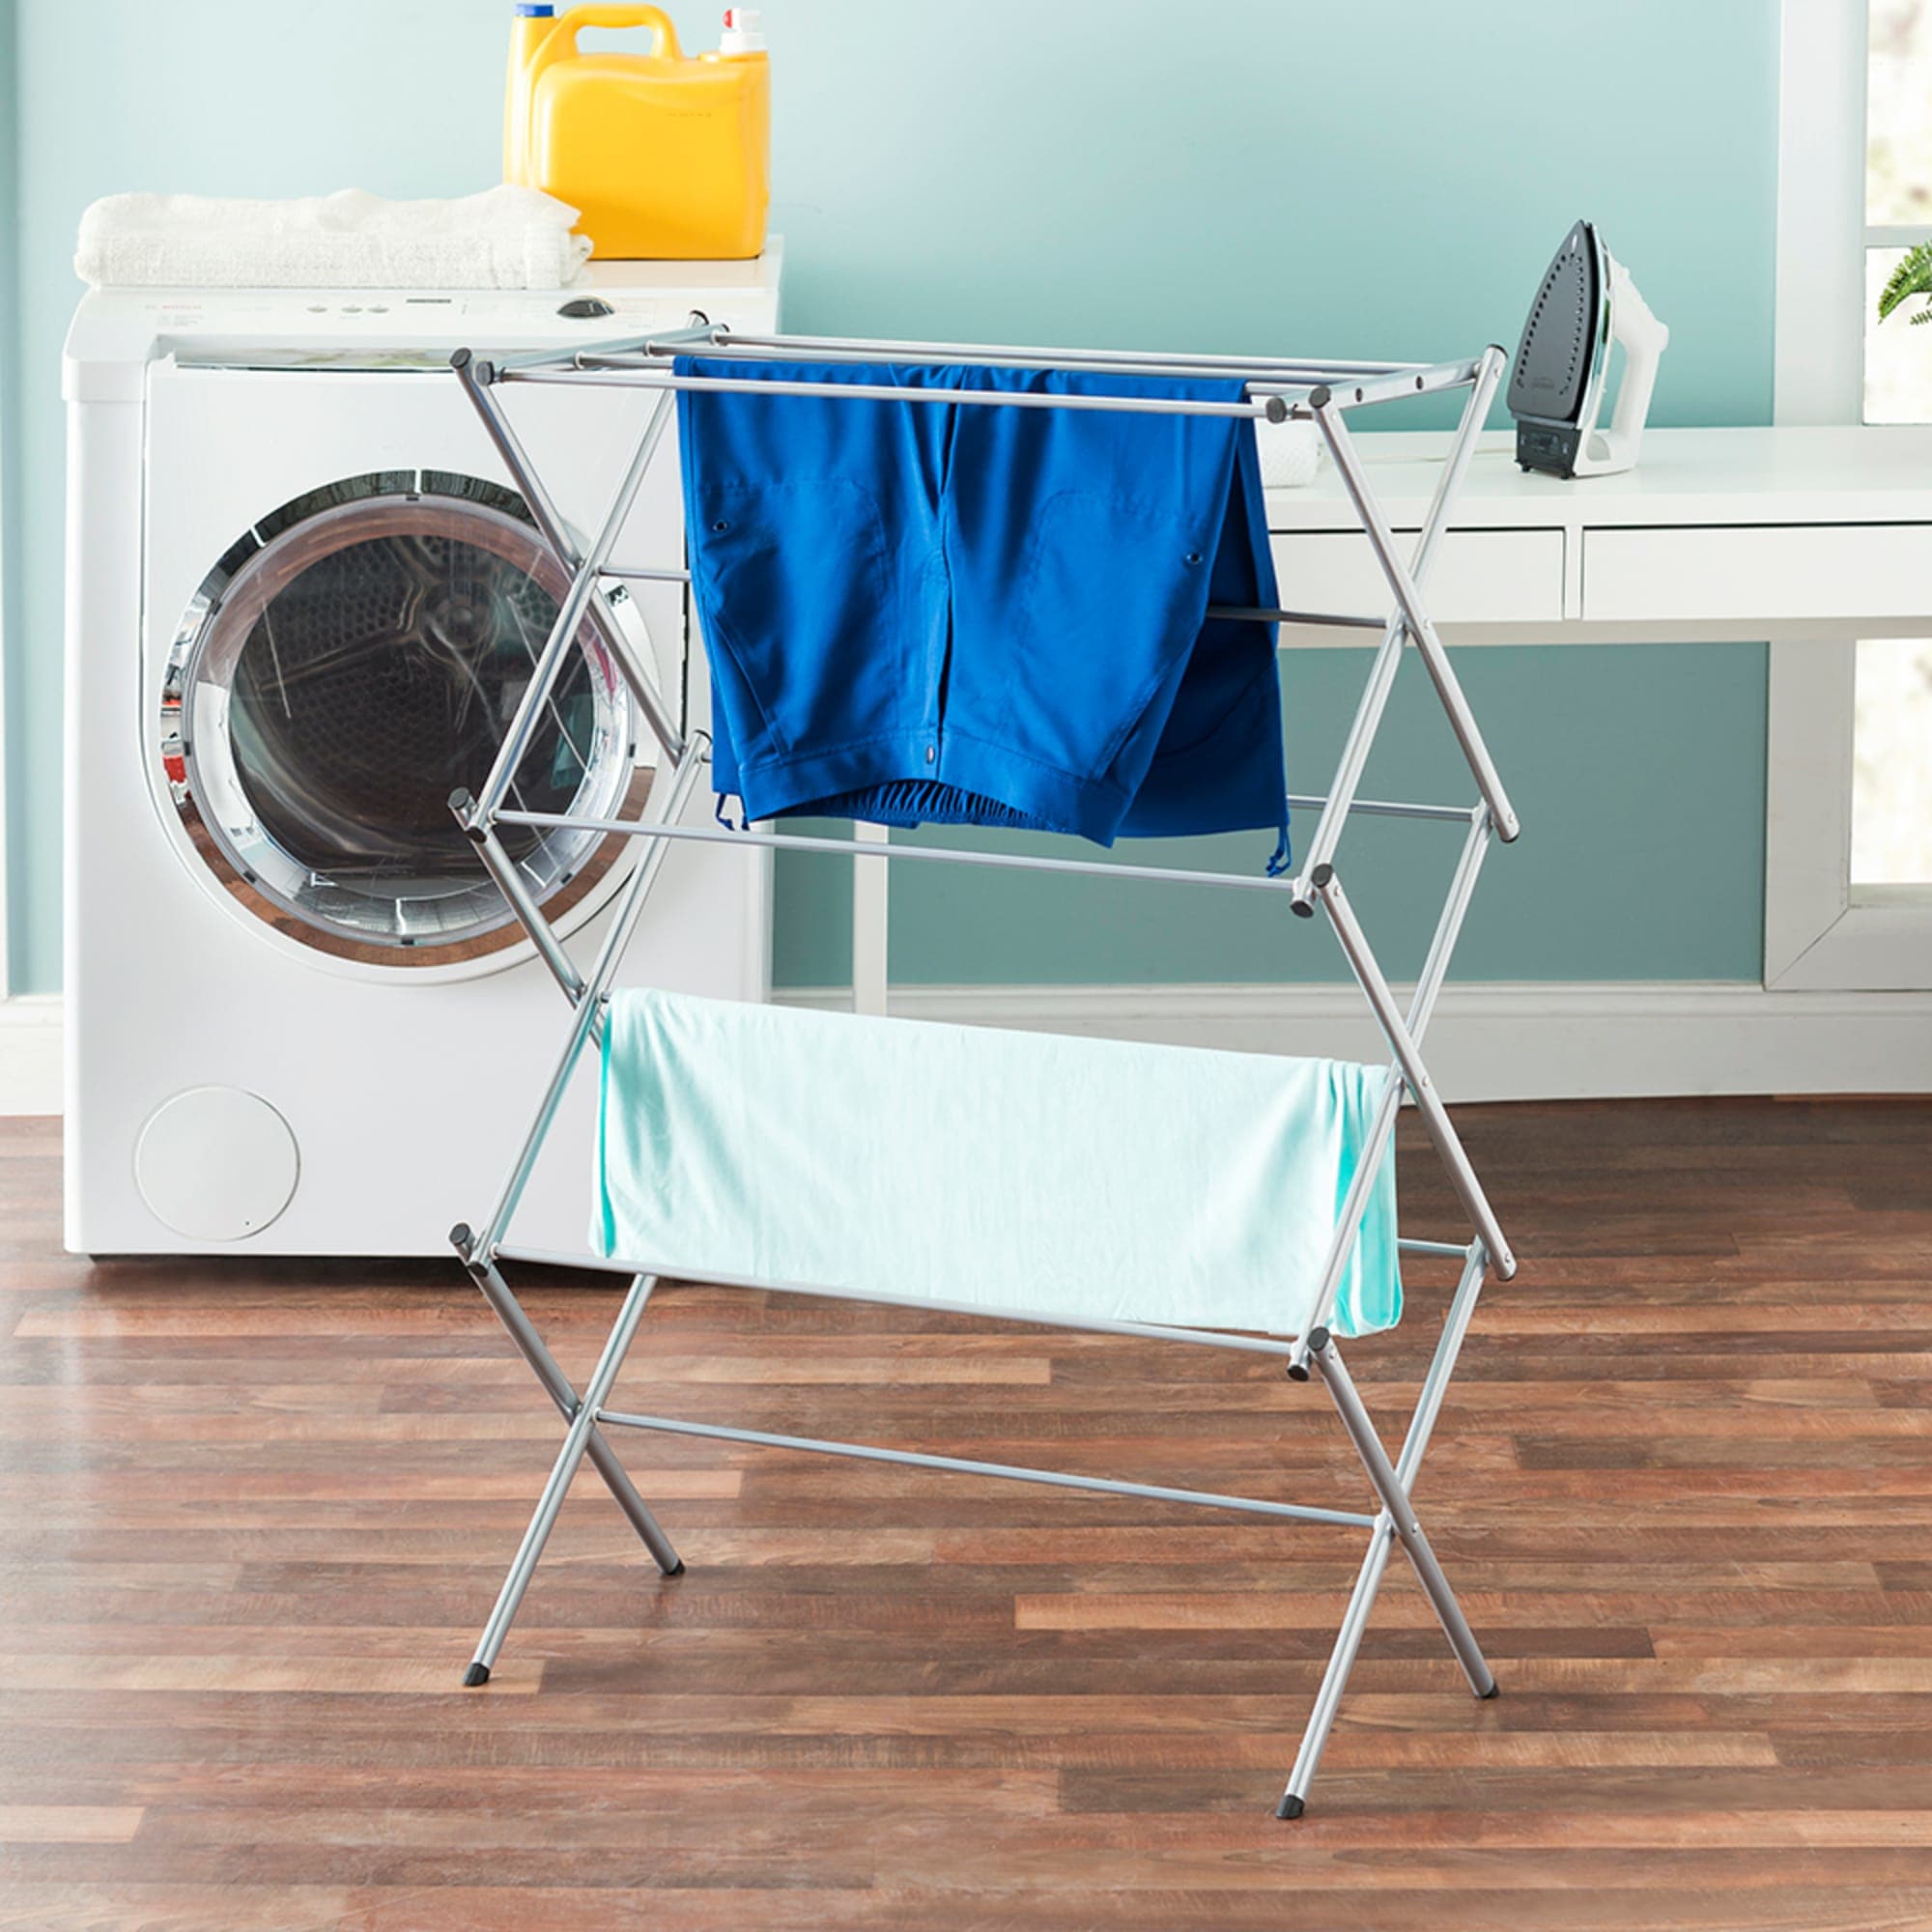 3 Tier Rust-Proof Enamel Coated Steel Collapsible Clothes Drying Rack, Grey, DRYING